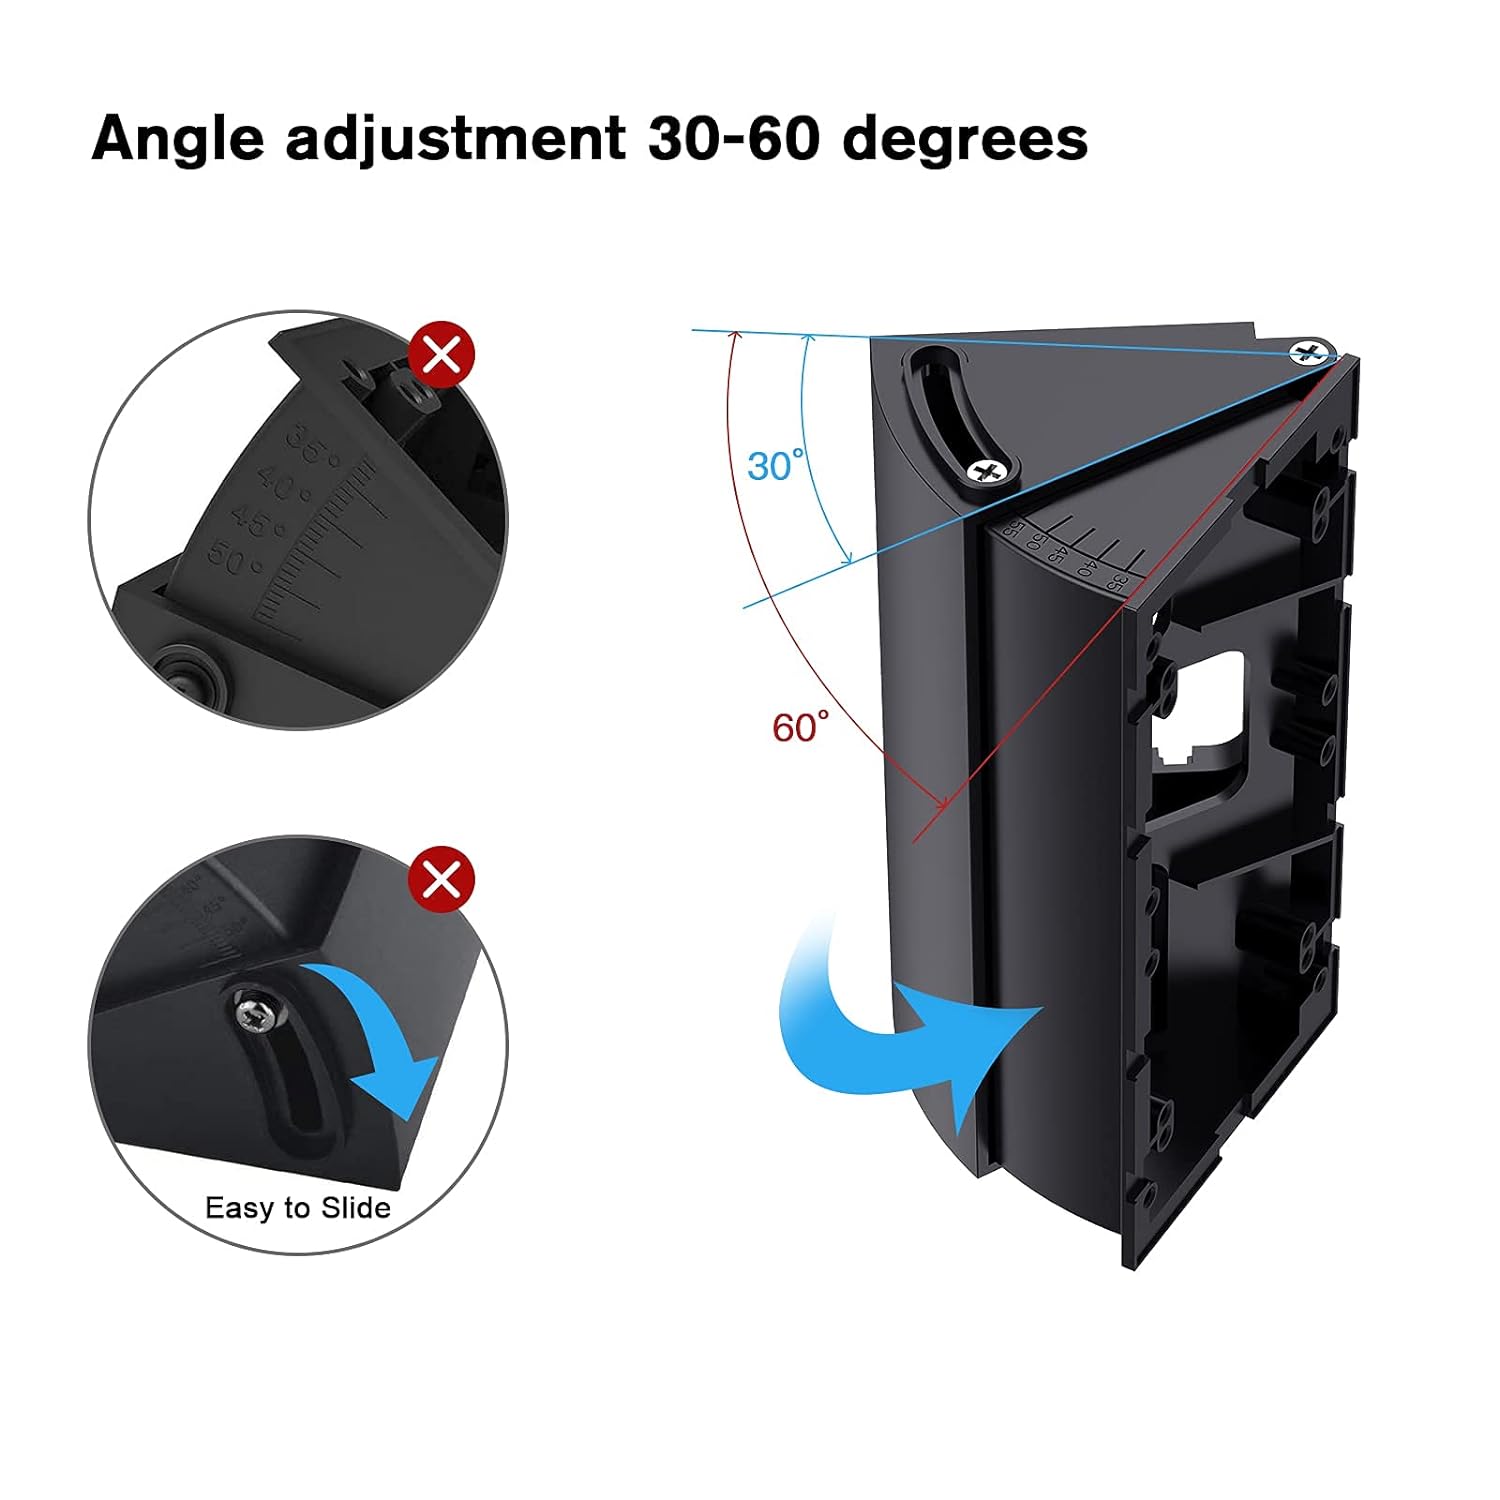 OLAIKE (Upgraded) Waterproof Adjustable Angle Mount for Video Doorbell 1st & 2nd Gen & Doorbell 2/3/4,Angle Mount(30 to 60 Degree),Mounting Plate Wedge Corner Kit/Rain Shield/Power Cable slot,Black